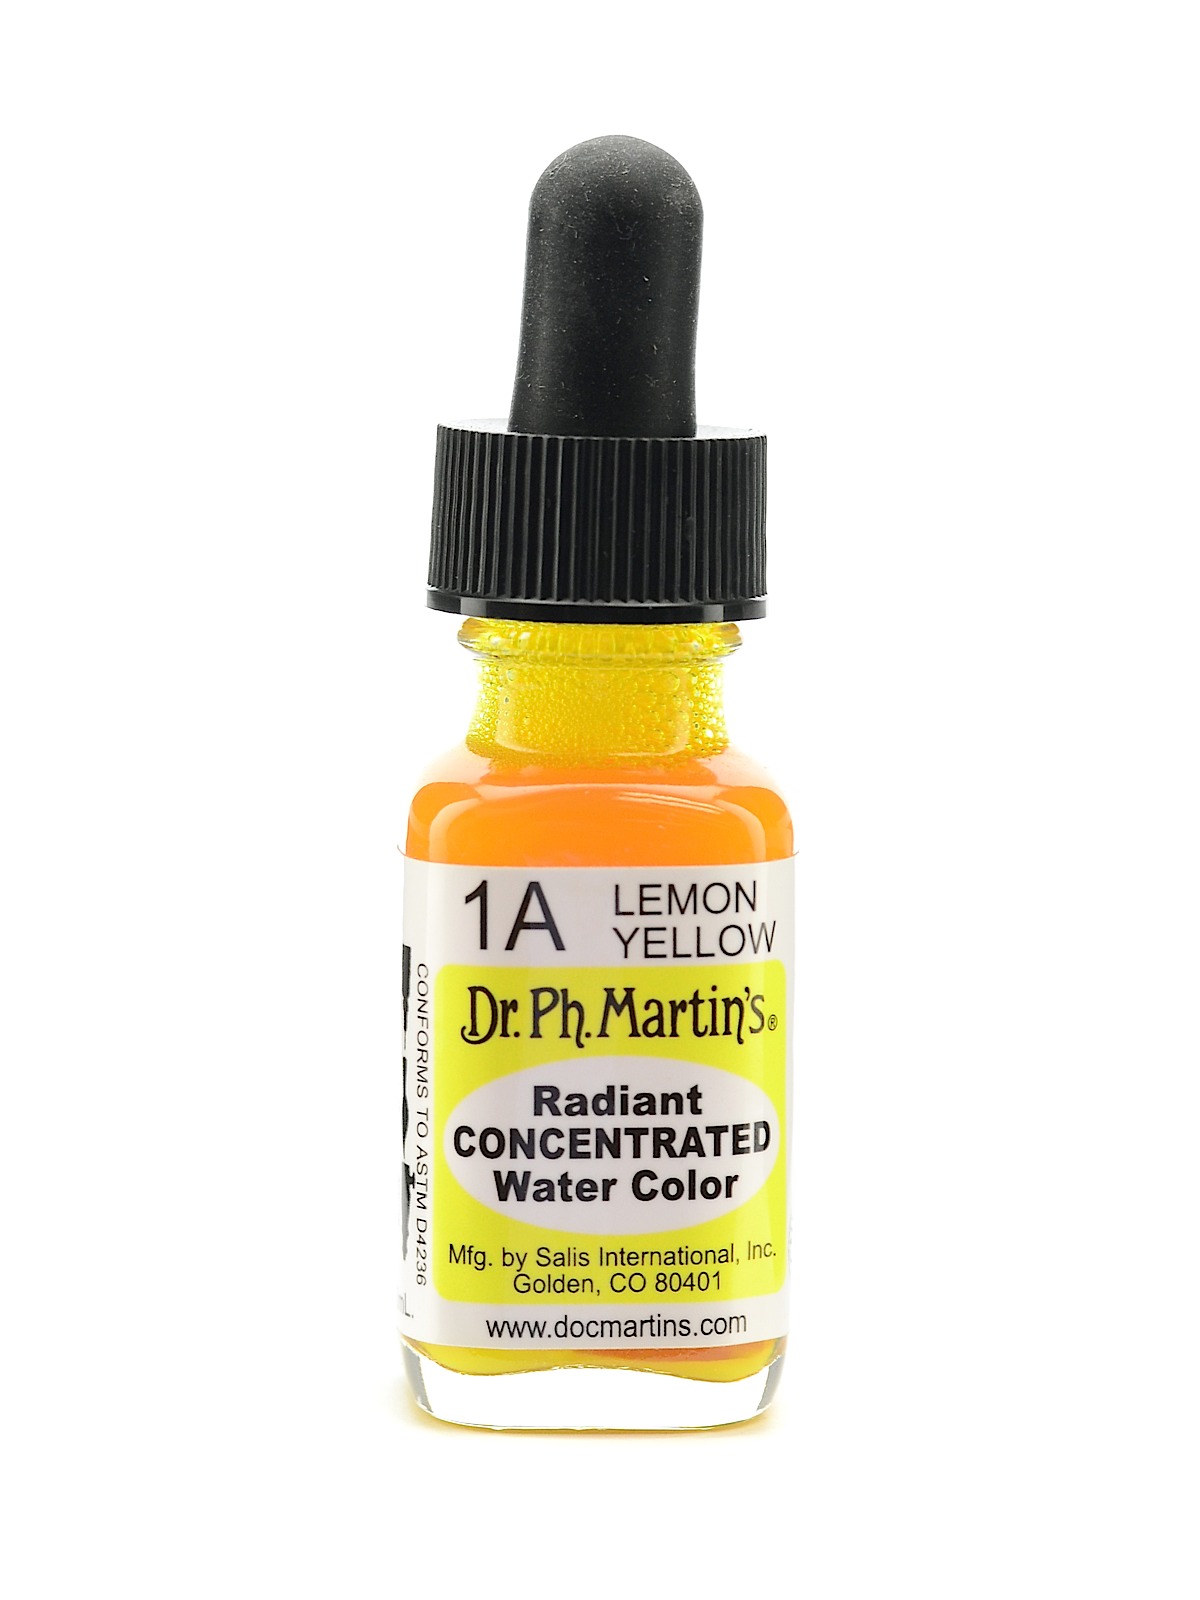 Radiant Concentrated Watercolors Lemon Yellow 1 2 Oz.